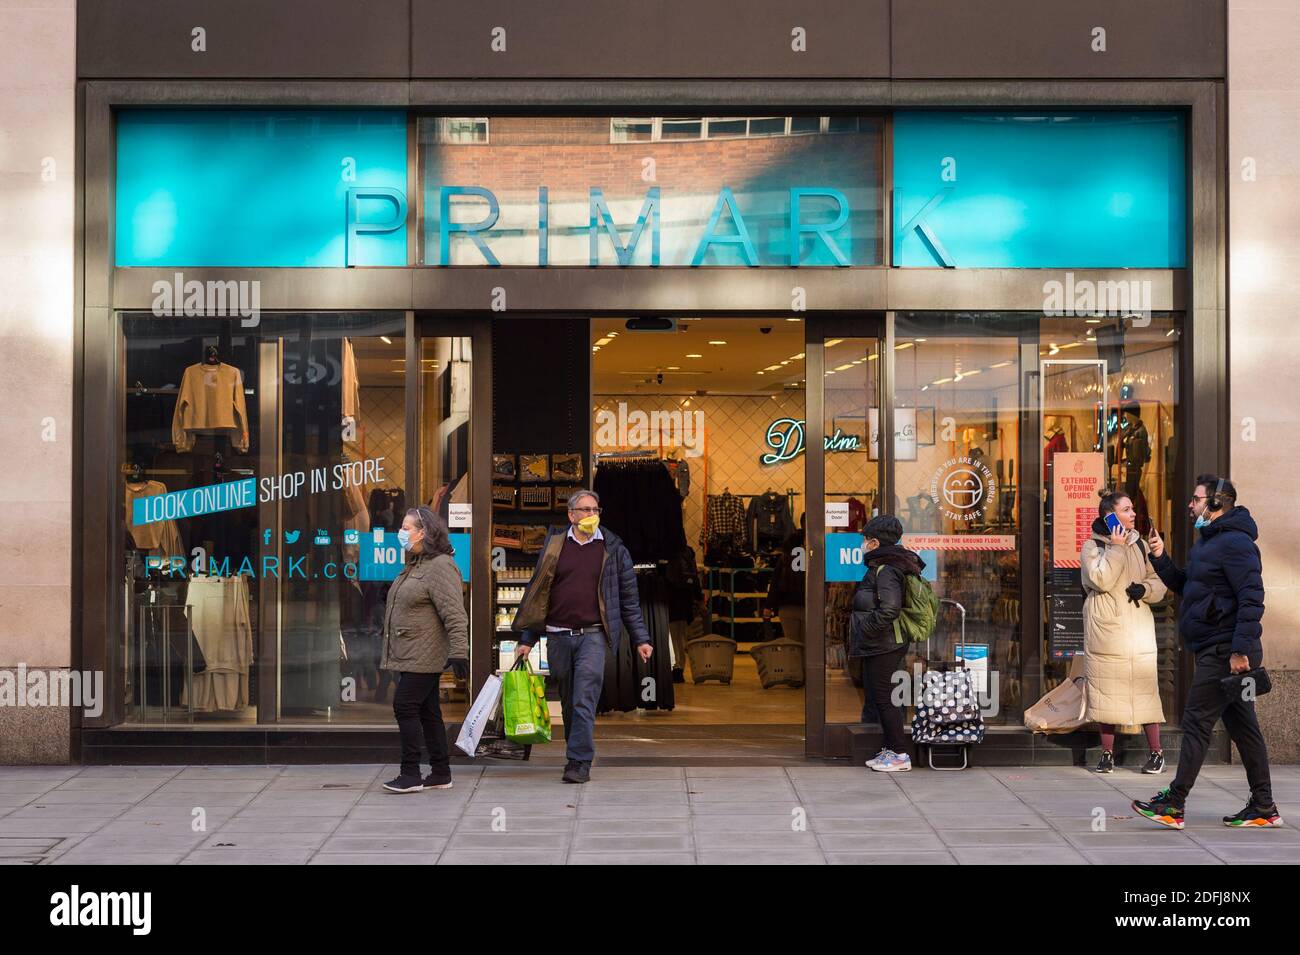 London, UK. 5 December 2020. Shoppers outside a Primark store in Oxford  Street on the first Saturday after lockdown restrictions were lifted on 2  December. Retailers are hoping that physical sales will